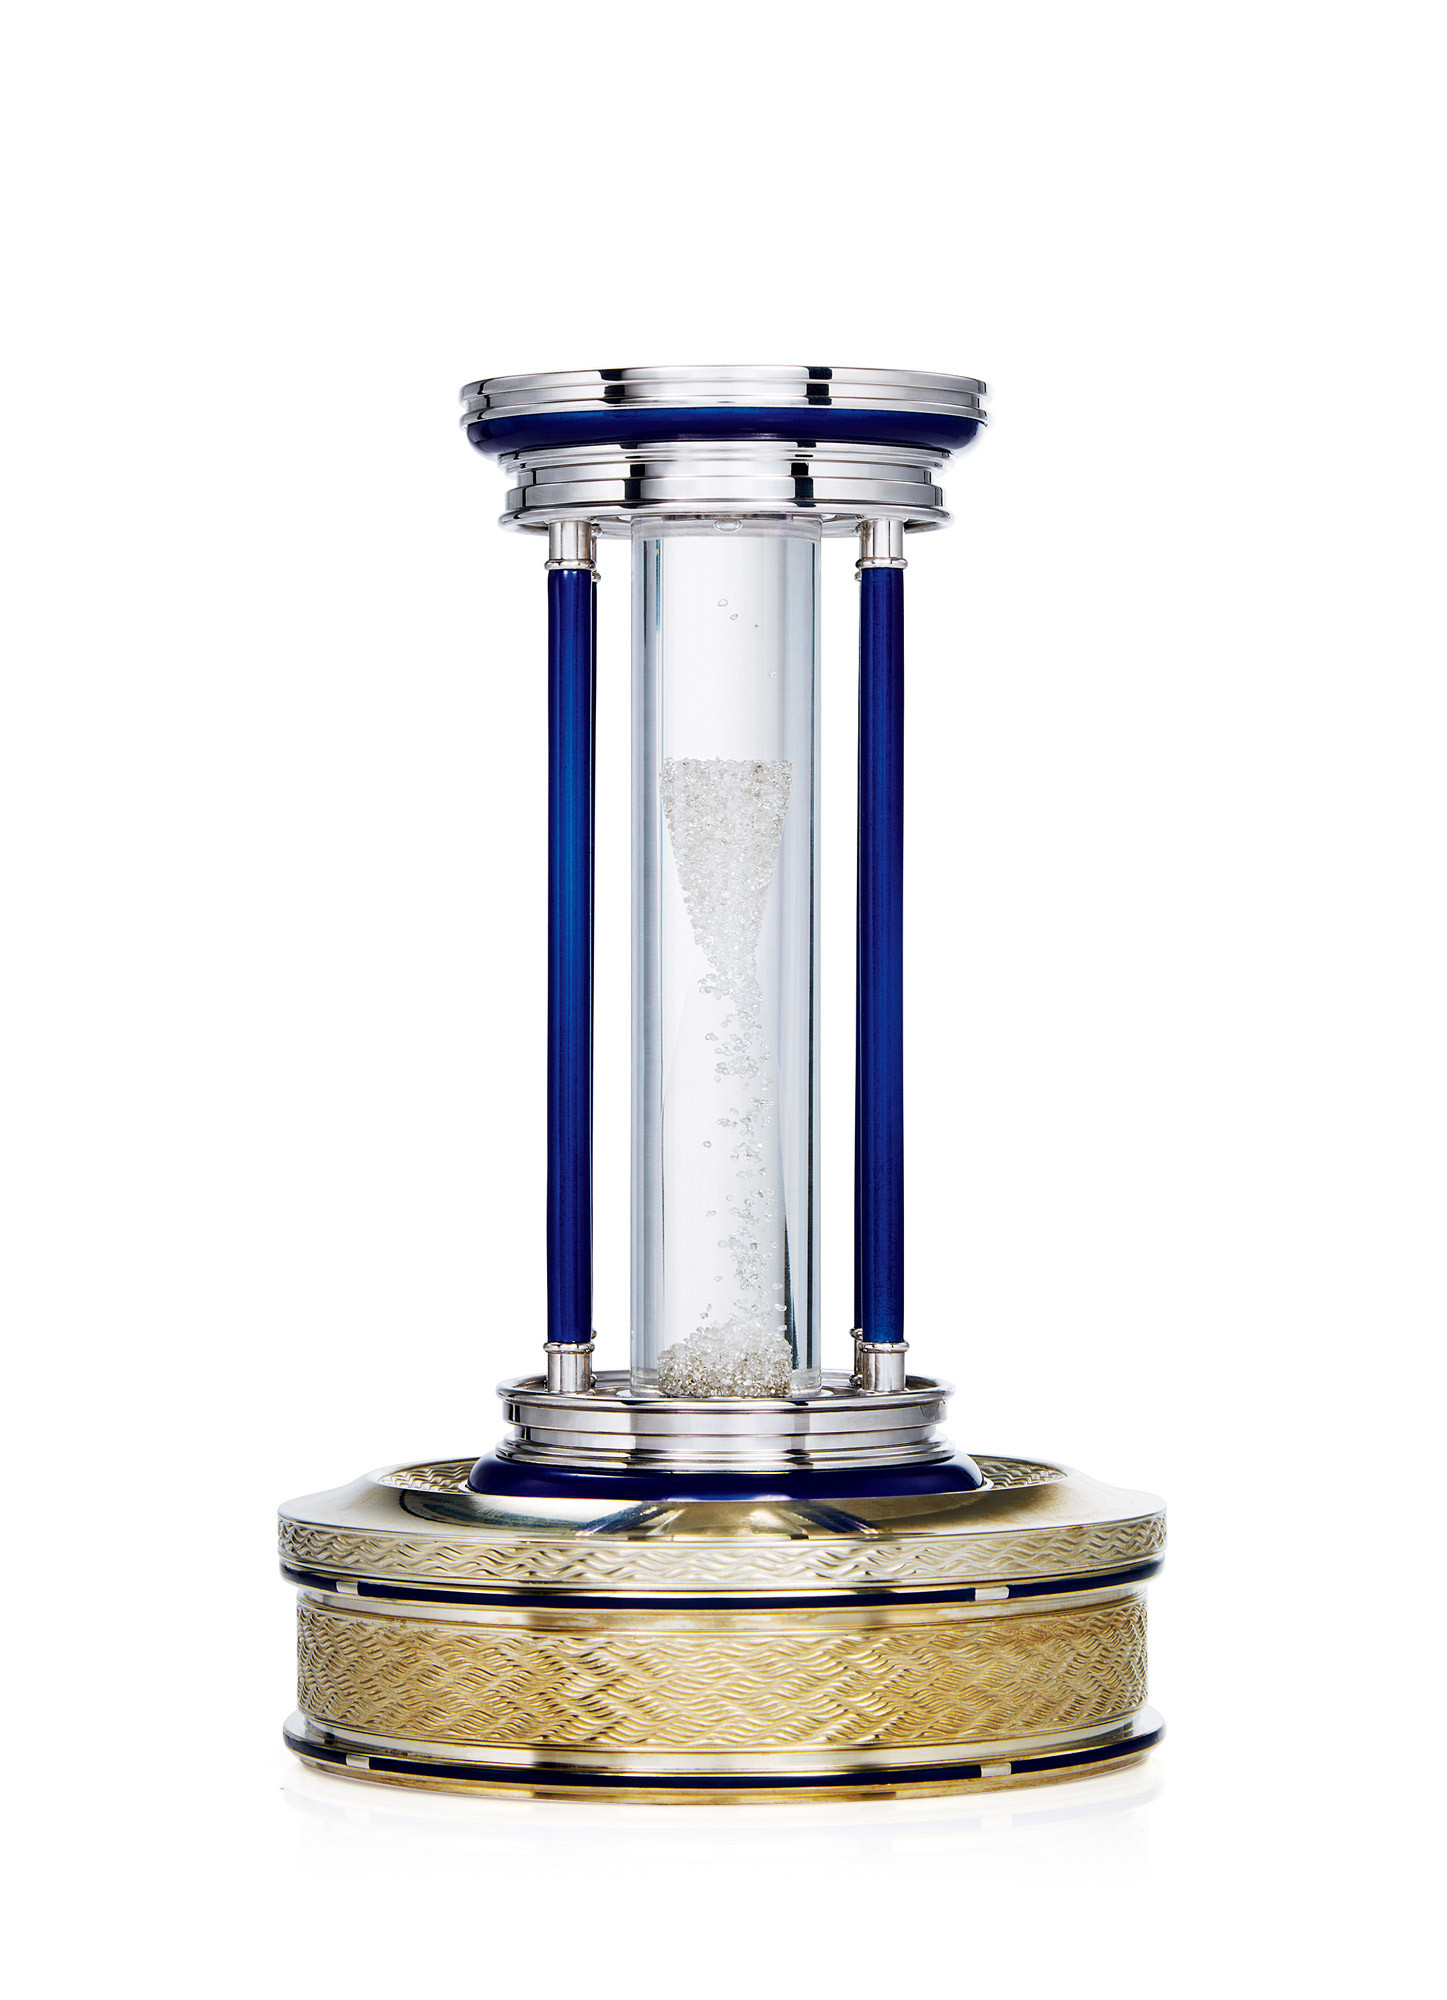 DE BEERS  A STERLING SILVER AND ENAMEL HOURGLASS WITH FLOATING DIAMONDS